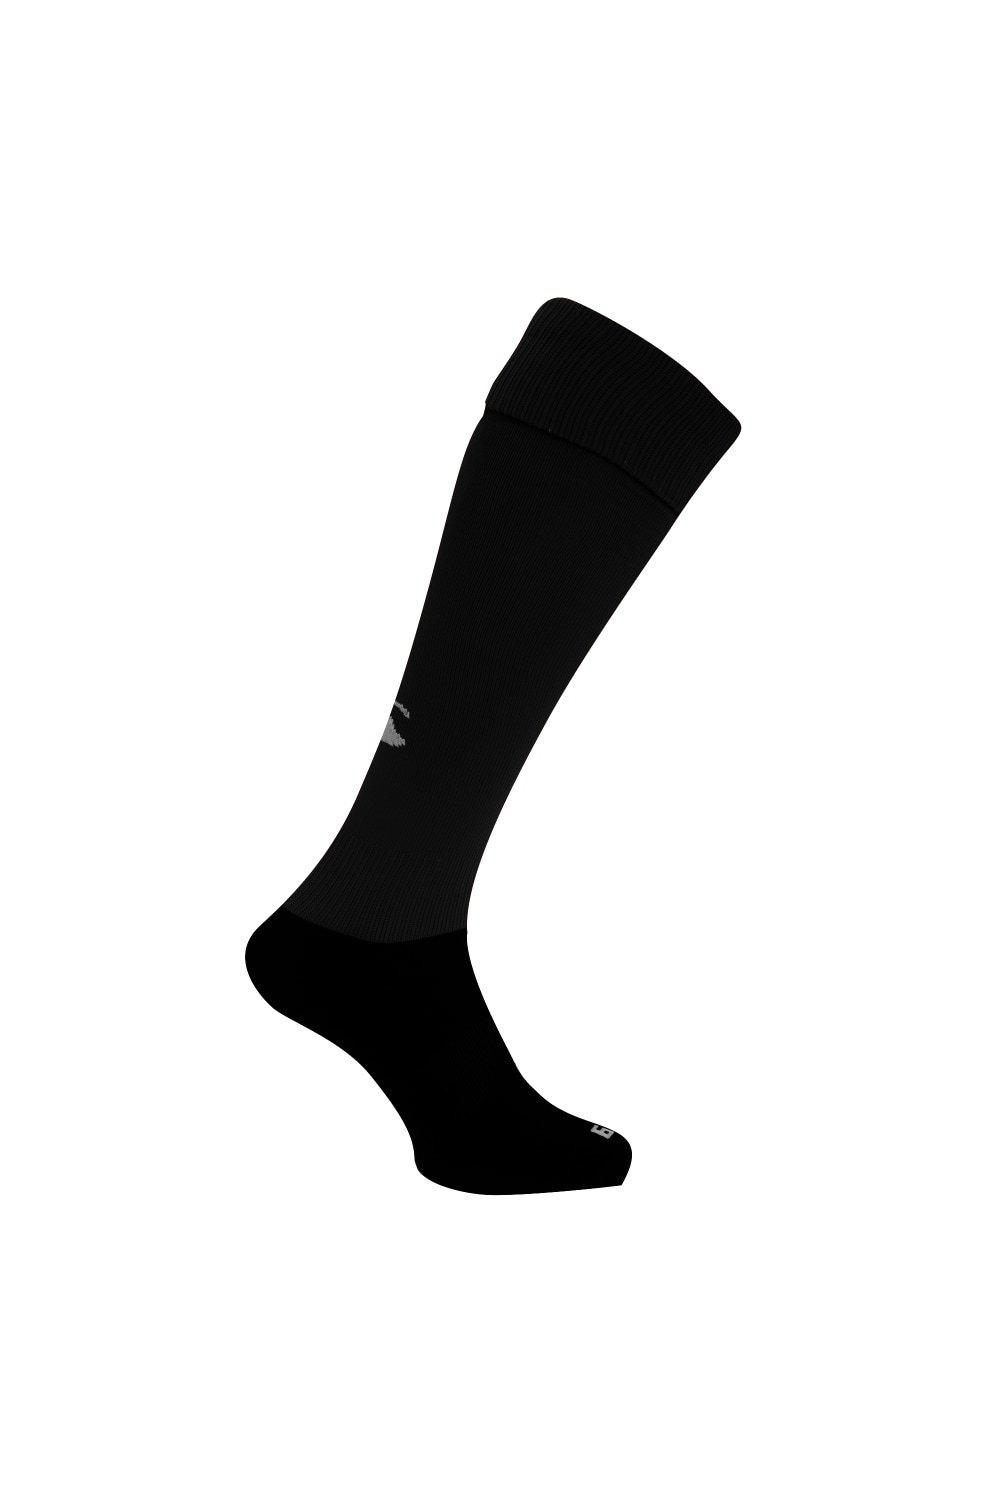 Playing Rugby Sport Socks